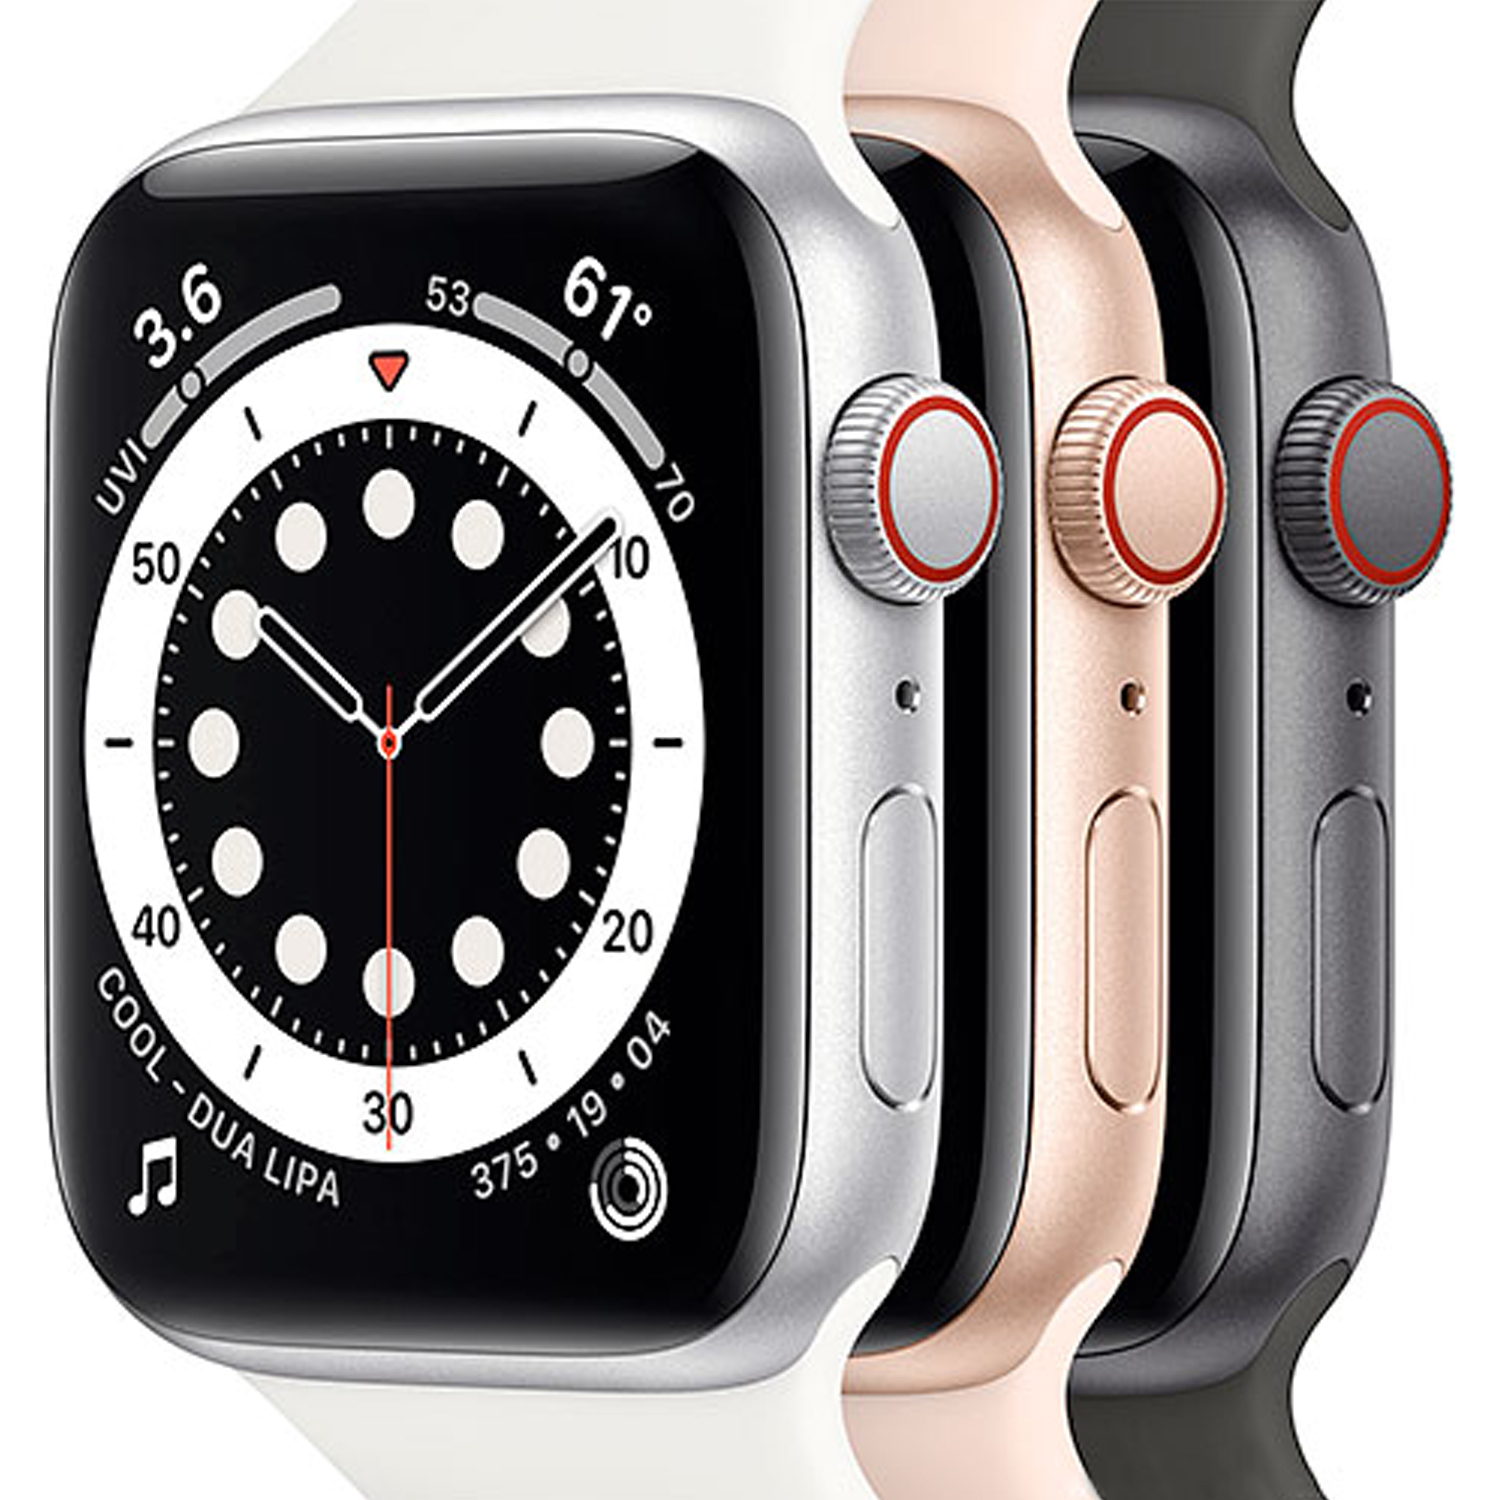 Apple Watch SE 40mm GPS - Full Watch Specifications  Price - GadgetsRealm